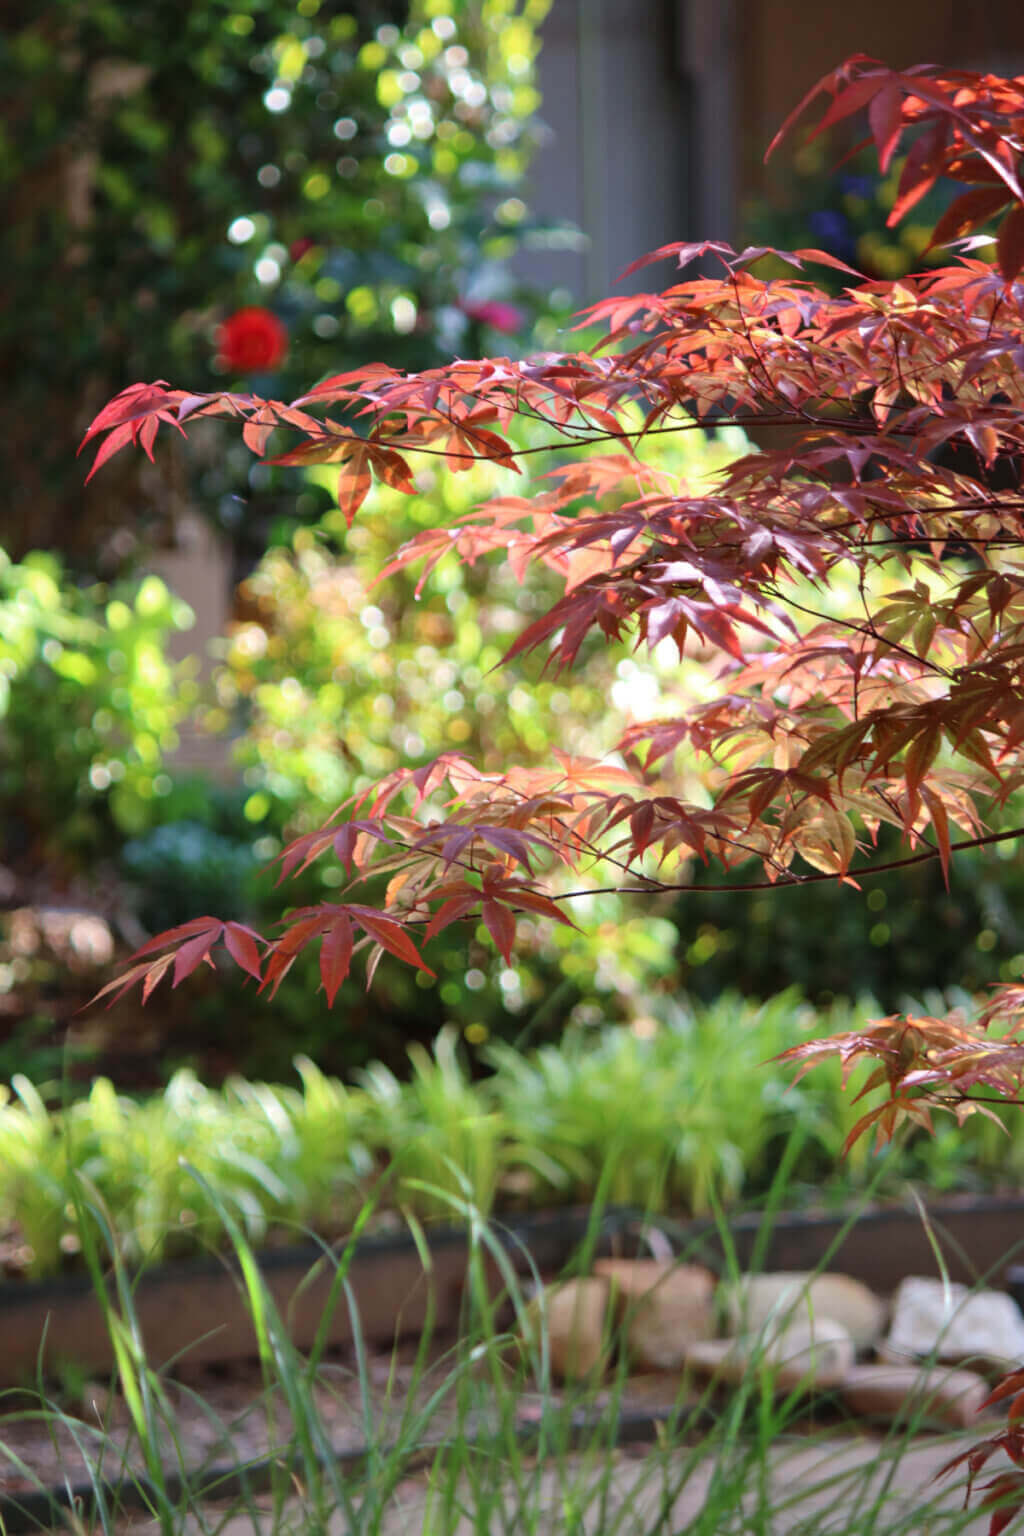 A close up view of the red leaves of my Japanese maple I grow in a pot